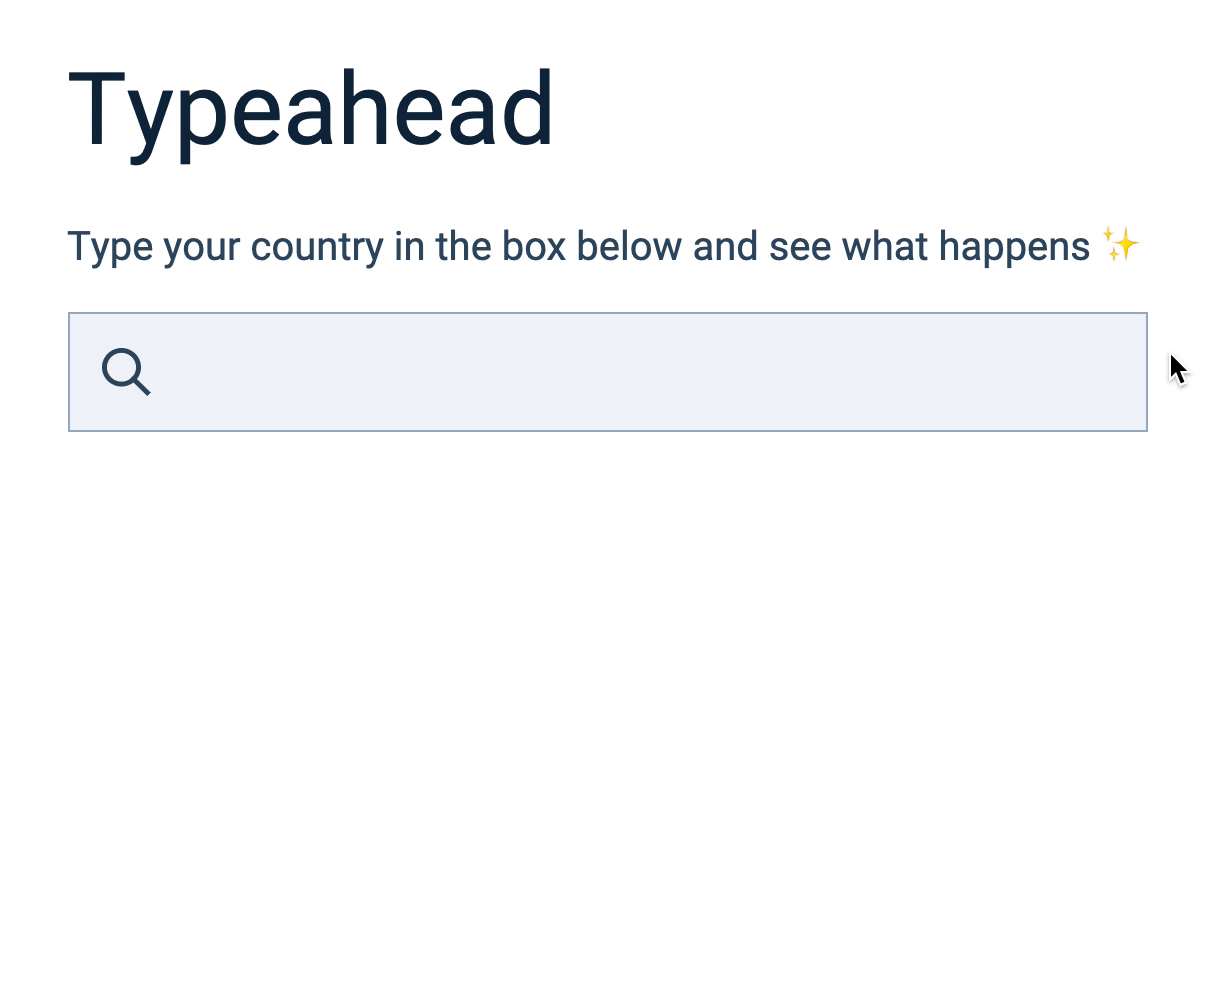 Typeahead (or Autocomplete)